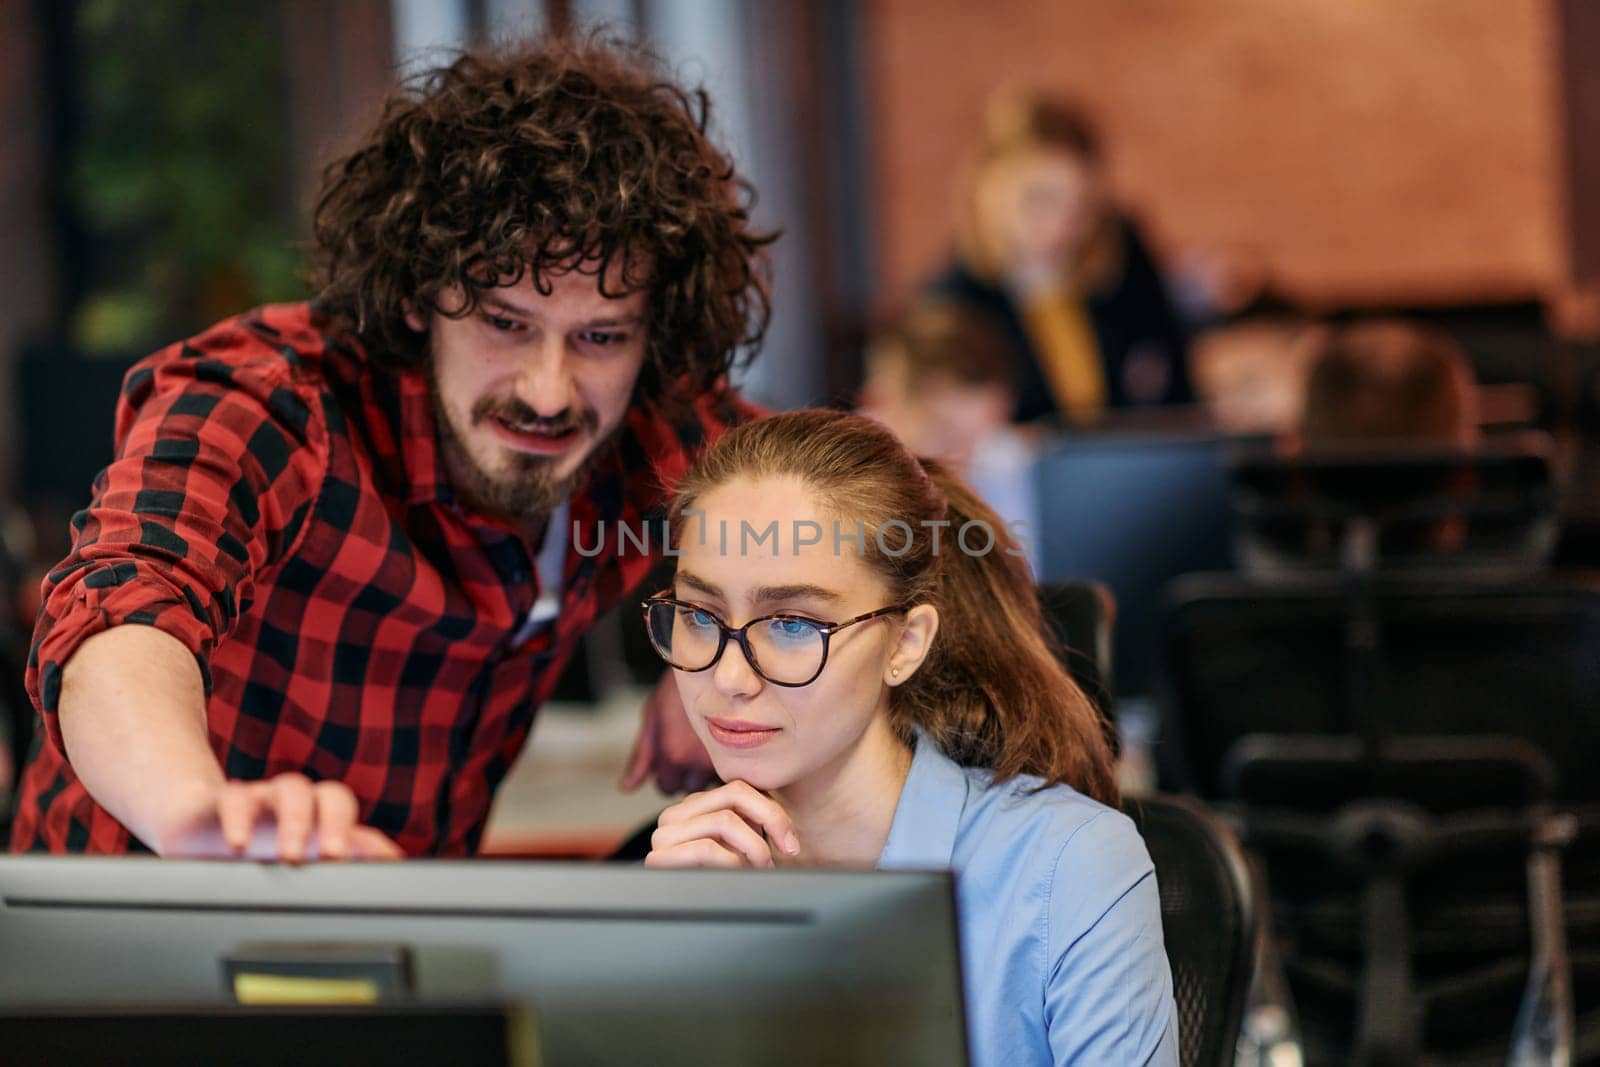 Business colleagues, a man and a woman, engage in discussing business strategies while attentively gazing at a computer monitor, epitomizing collaboration and innovation by dotshock